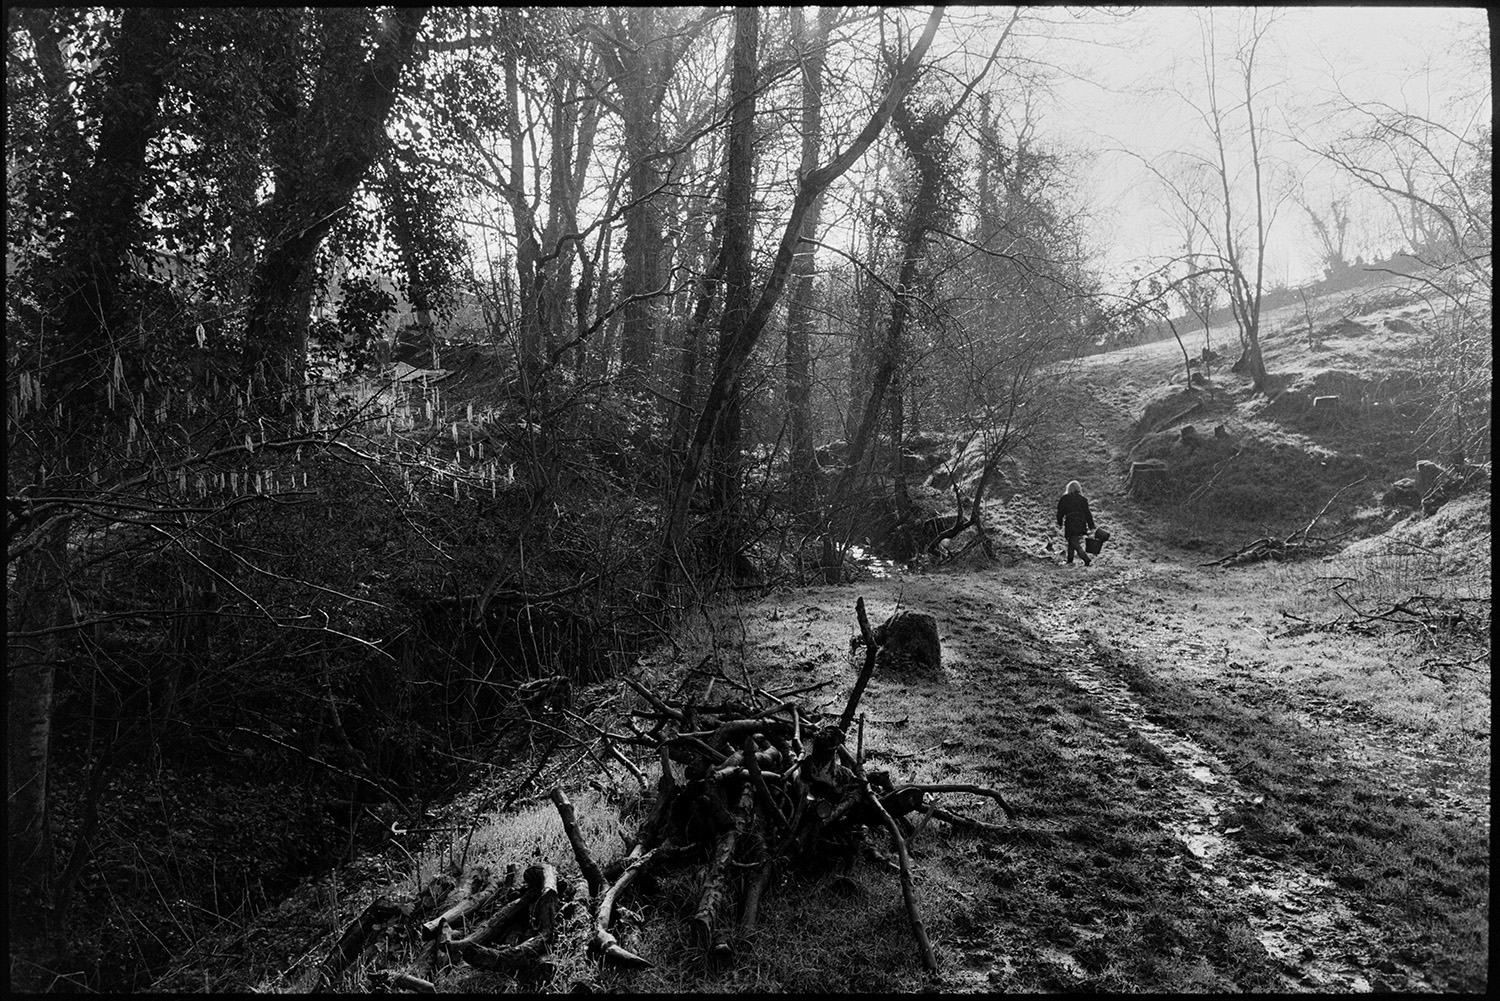 Woman farmer milking goat and fetching water from stream, old car in mud.
[Jo Curzon walking along a muddy path in a wooded valley at Millhams, Dolton to fetch water from a stream. Catkins are visible on a tree in the foreground.]